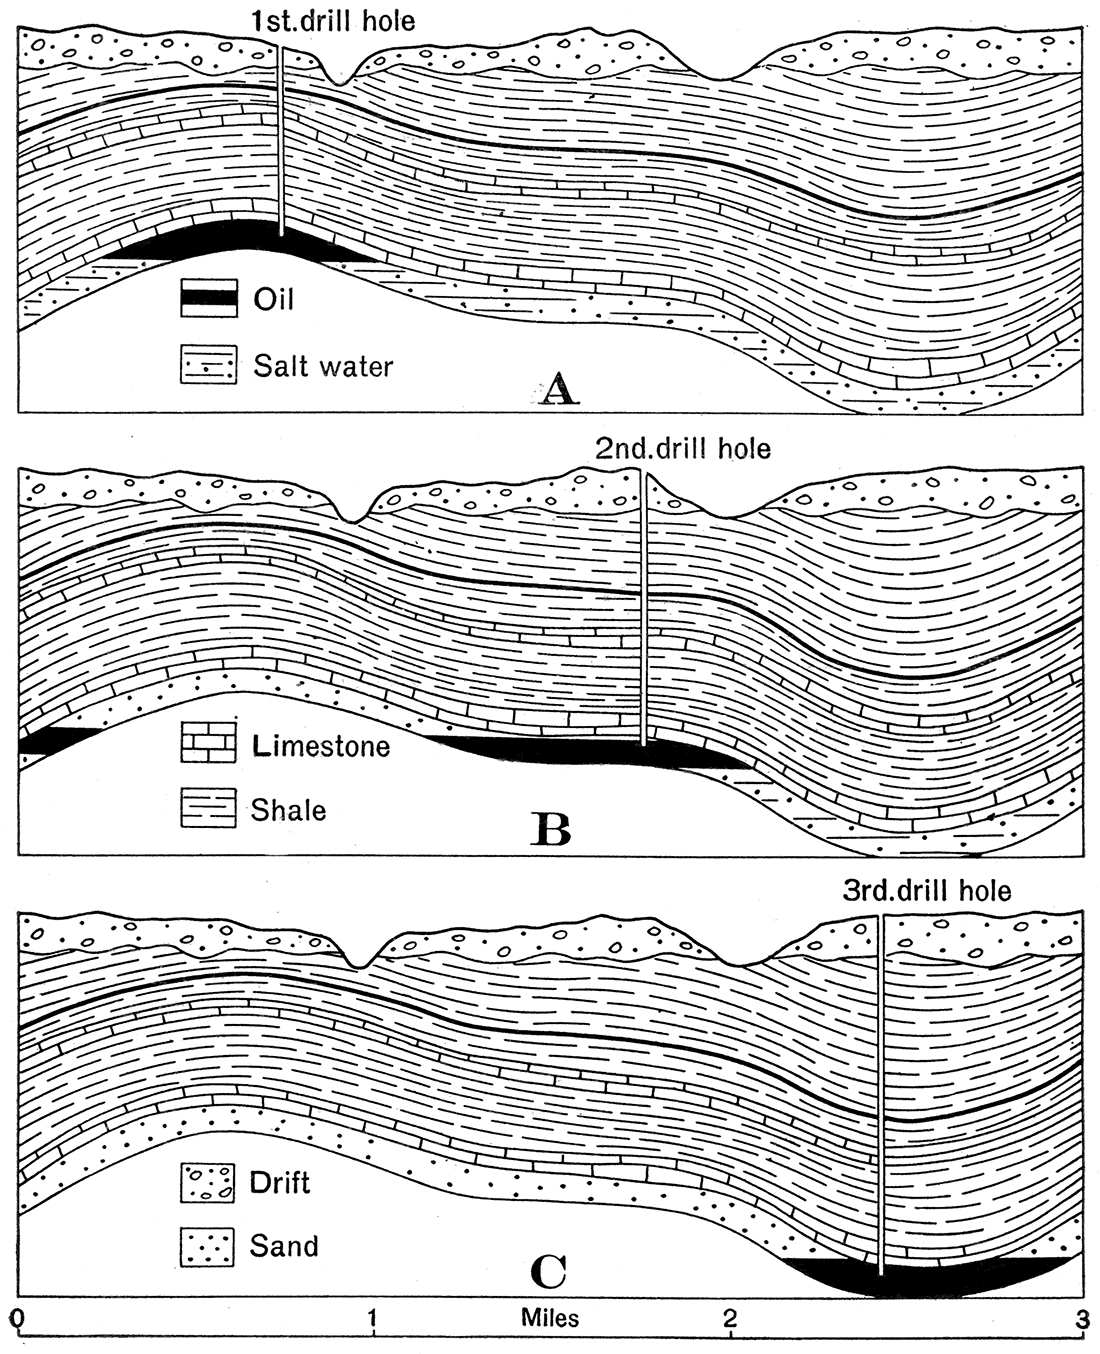 General diagram showing the relation of oil accumulation to geologic structure.